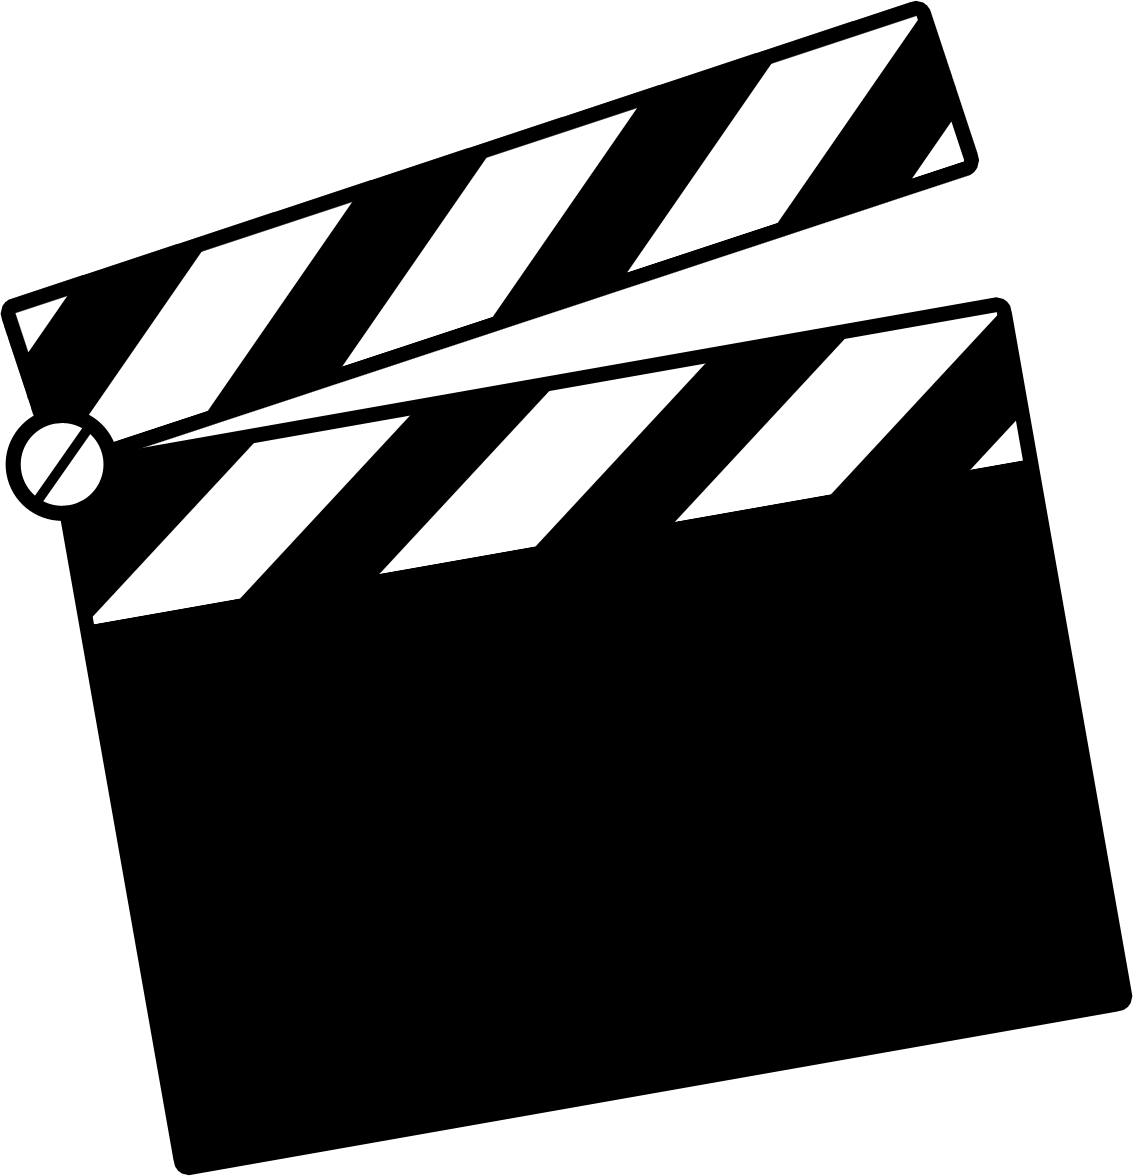 Movie Clapboard Clipart - Cliparts and Others Art Inspiration